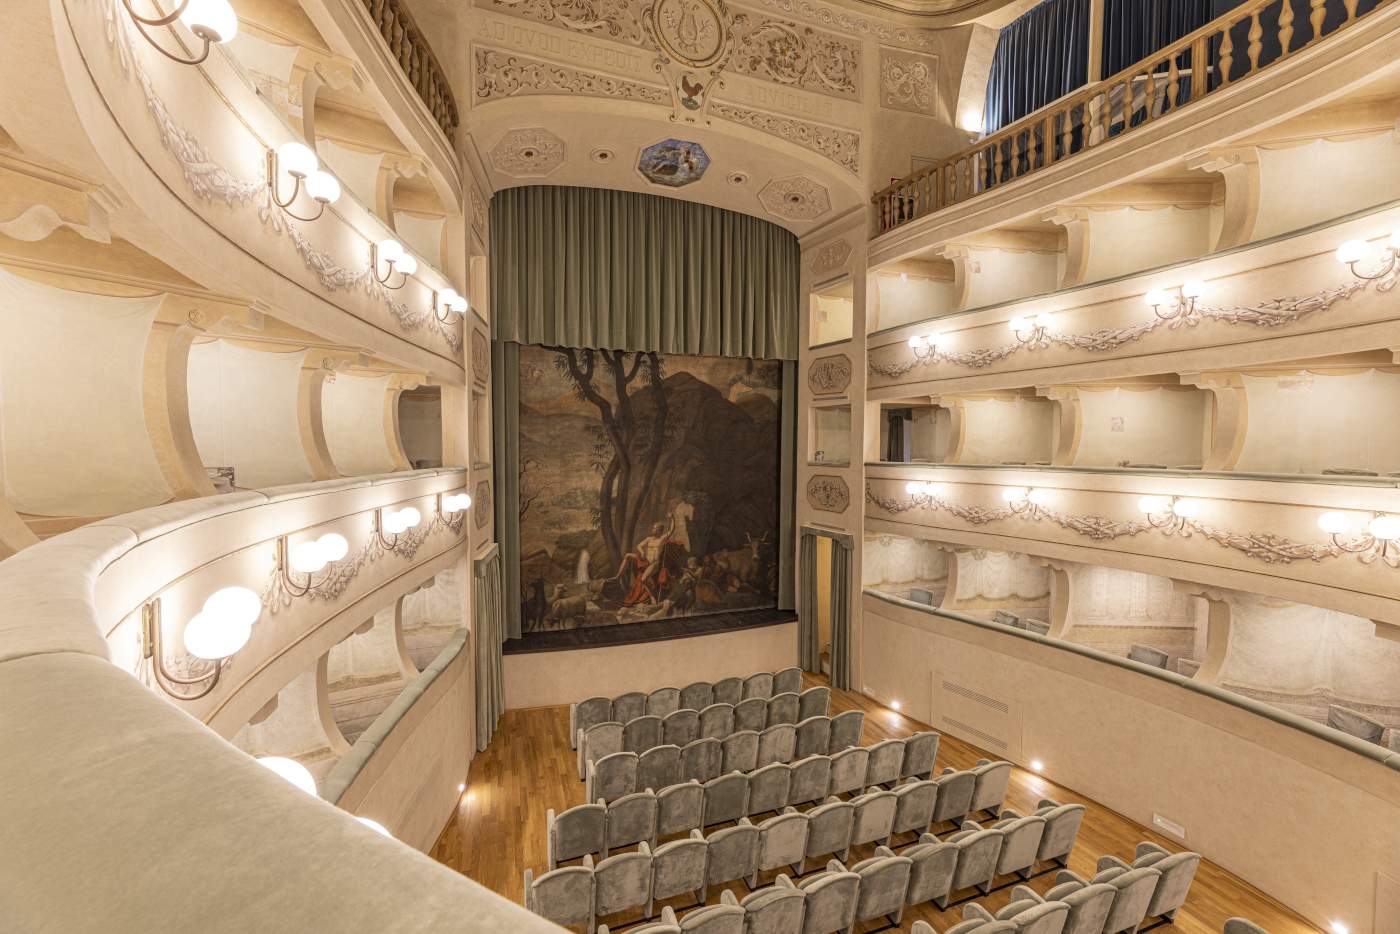 Portoferraio, Napoleon's Theater reopens after restoration. Wall paintings in the boxes have emerged.